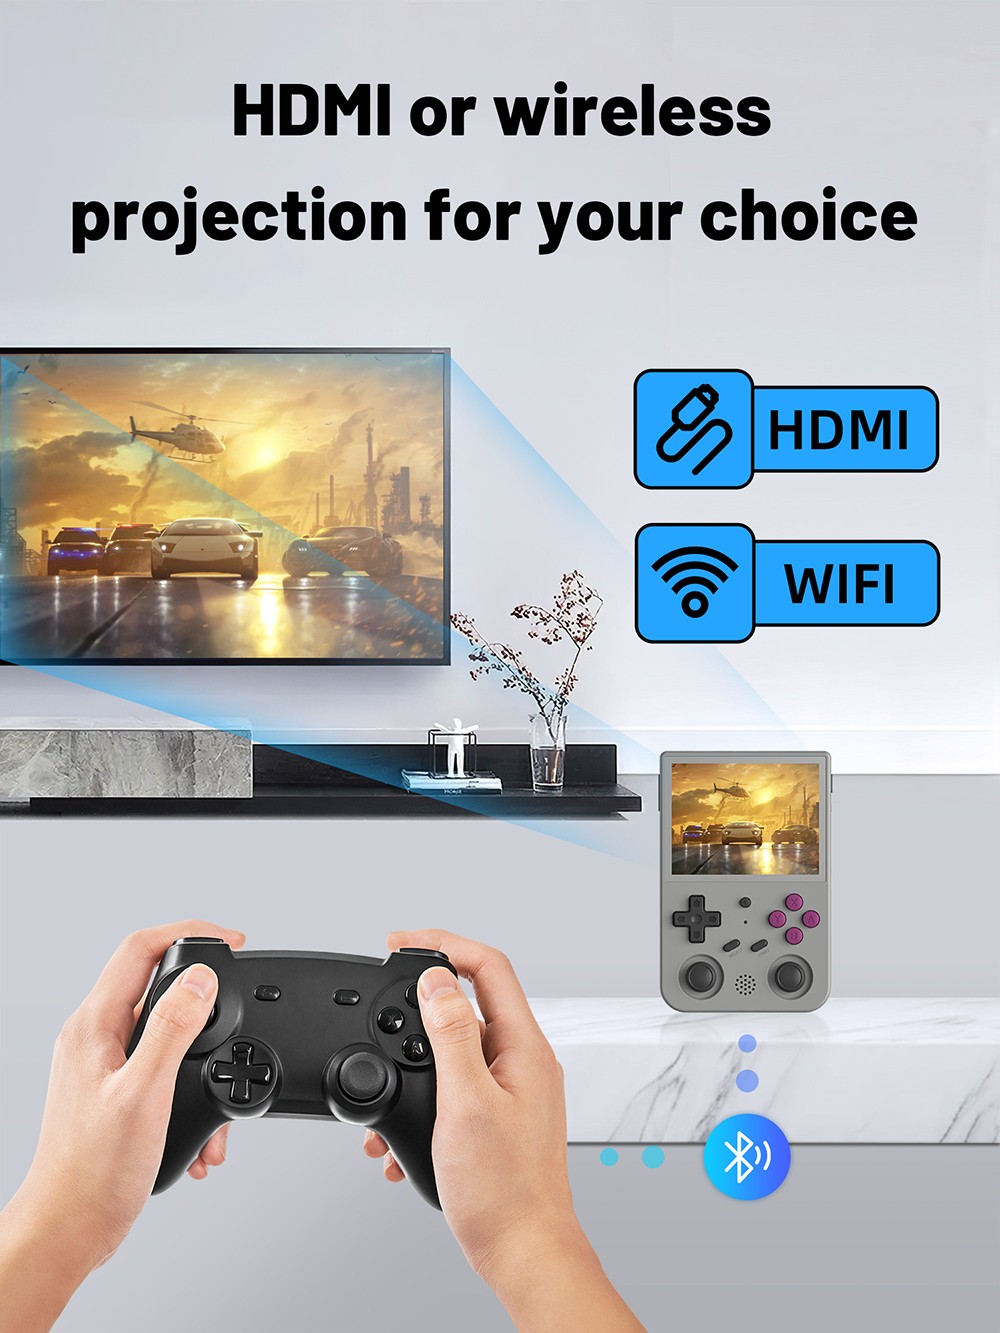 ANBERNIC RG353V Portable Game Console Android 32GB eMMC+16GB Linux+64GB Game TF Card 3.5'' IPS Retro WiFi Bluetooth